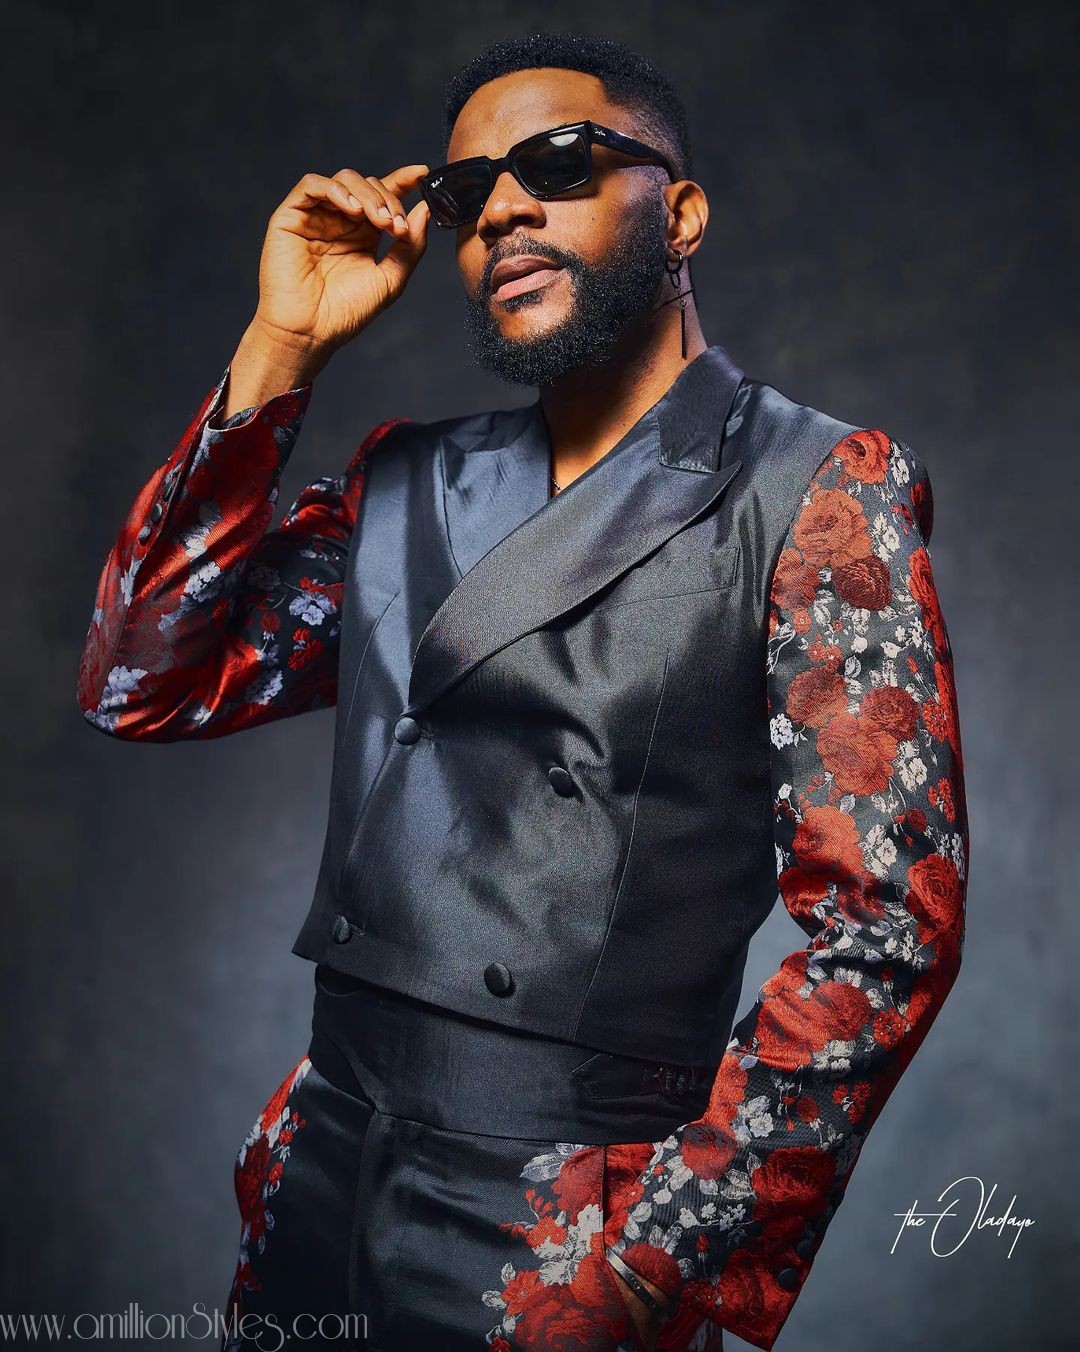 Ebuka Spices Our TVs With His Big Brother Naija Host Outfits